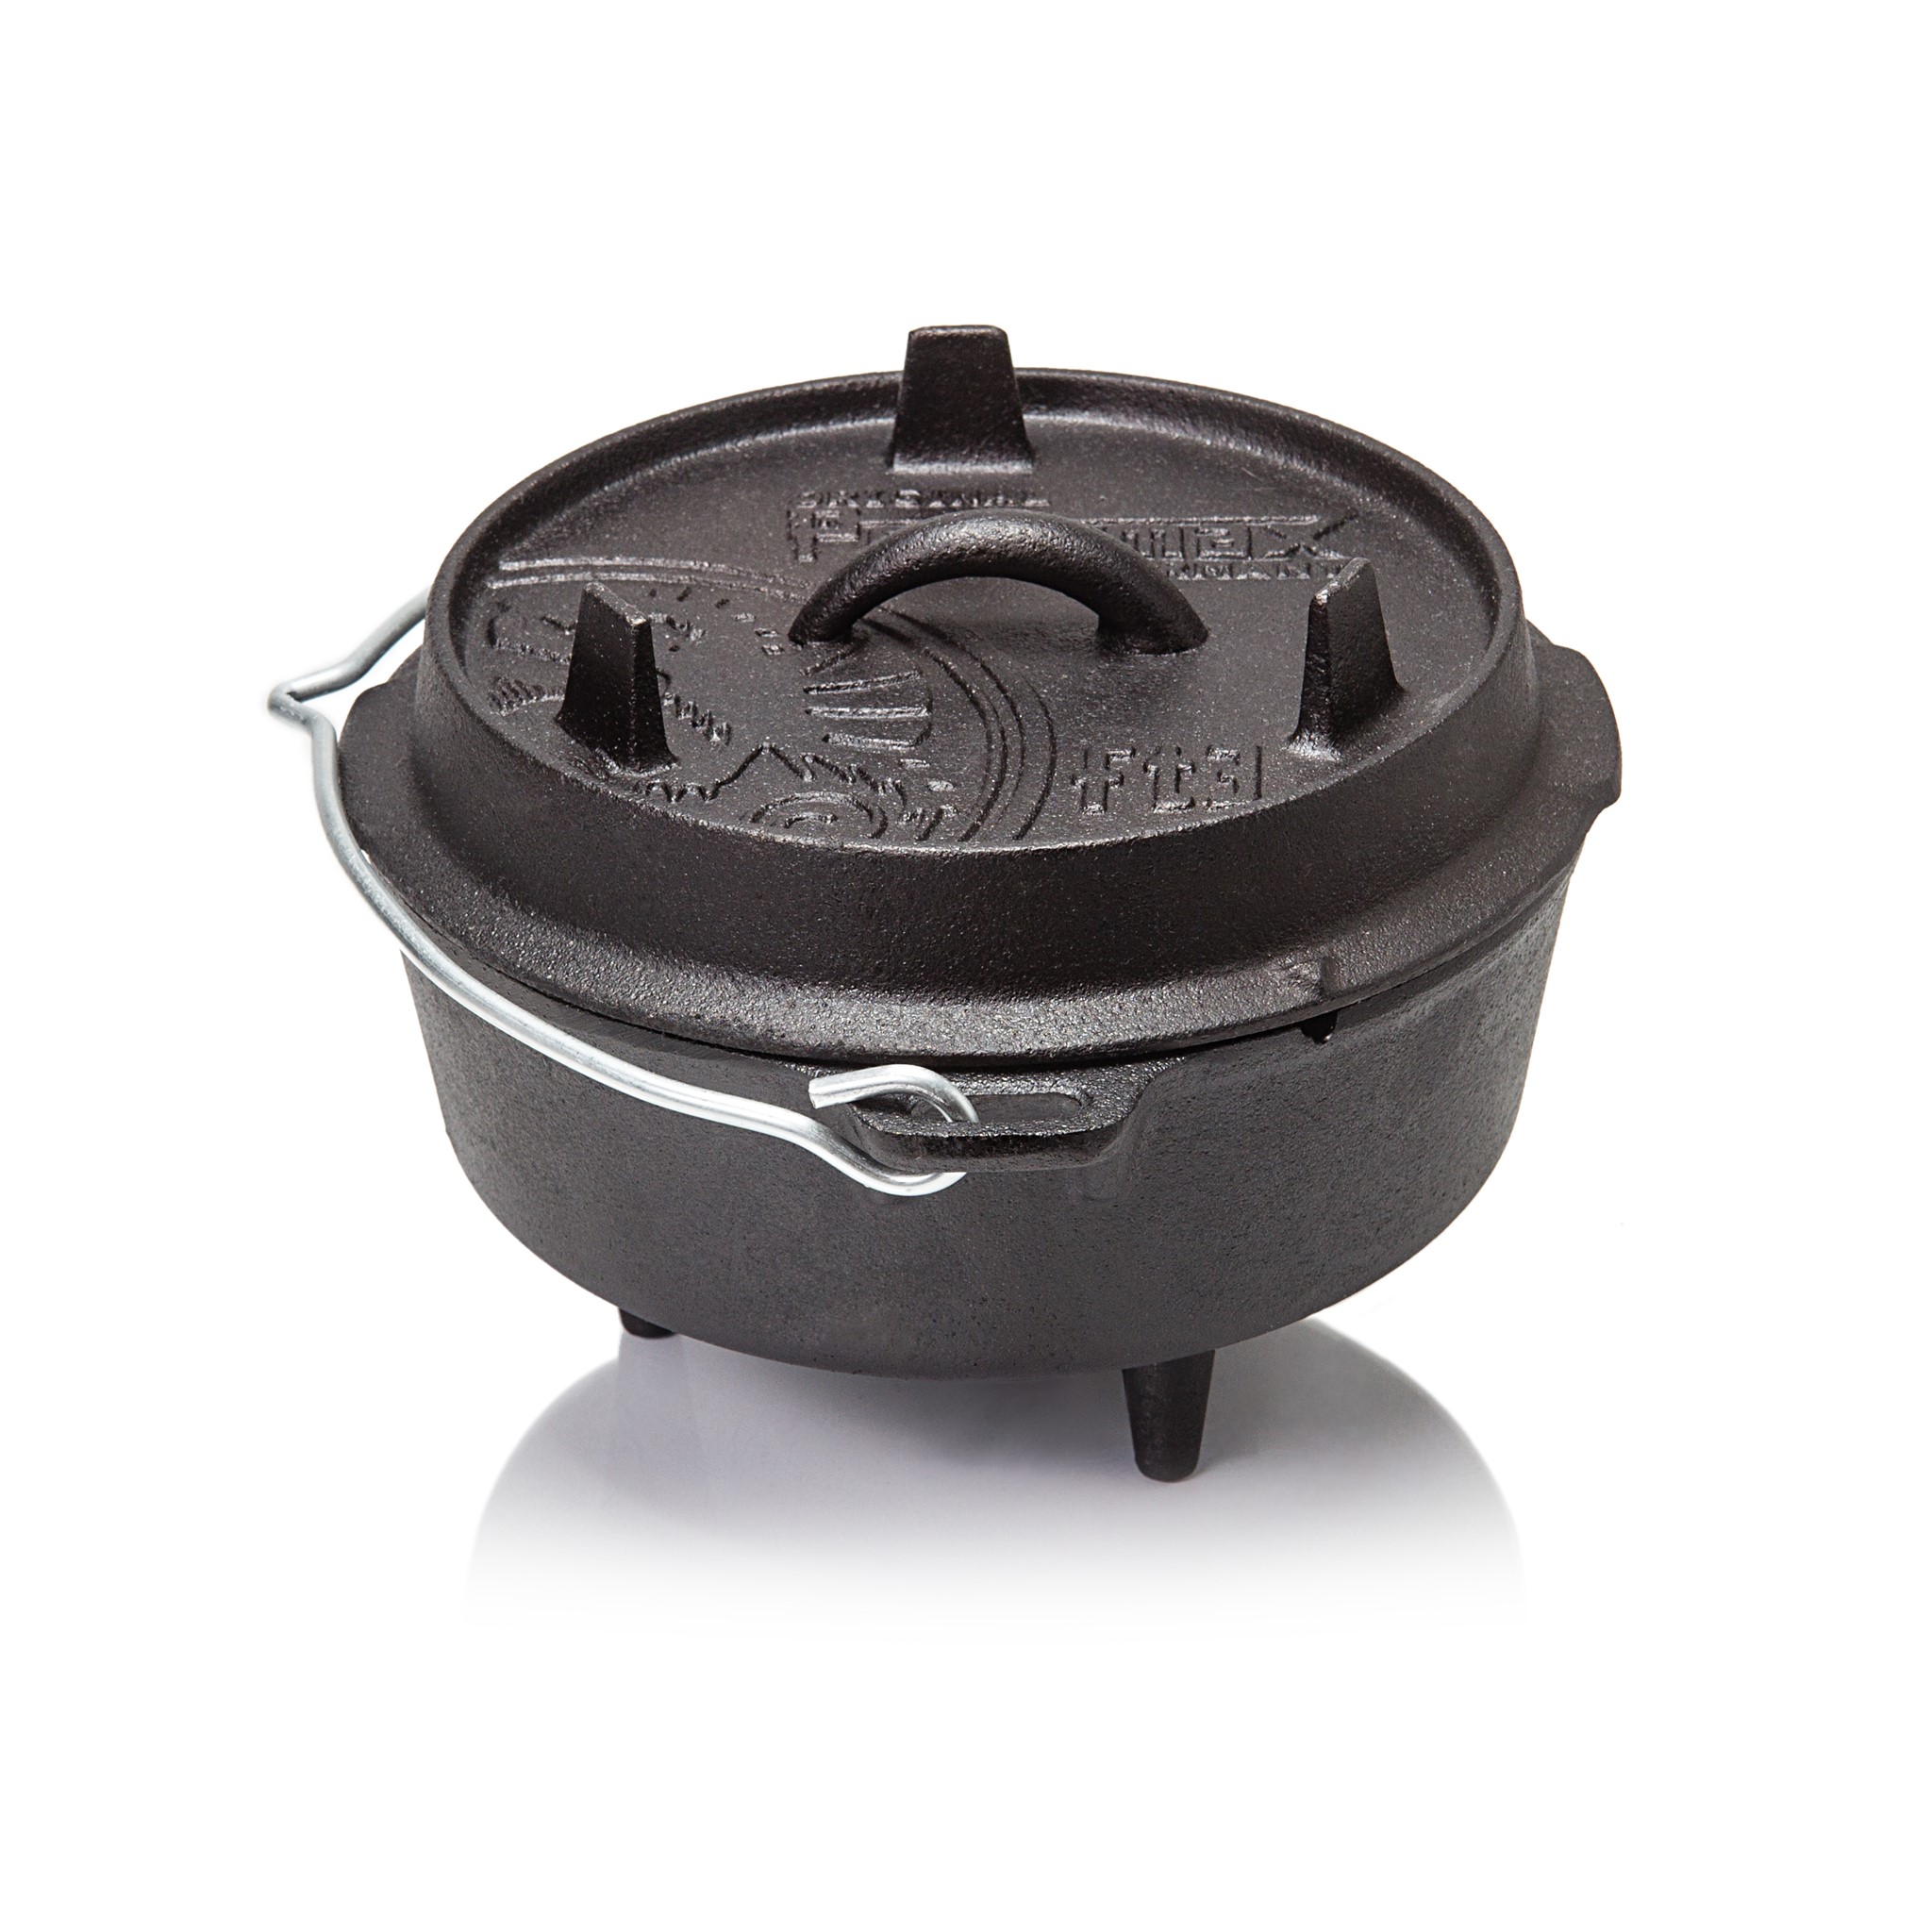 Picture of Petromax - Dutch Oven FT3 1.6 Liter (with Legs)